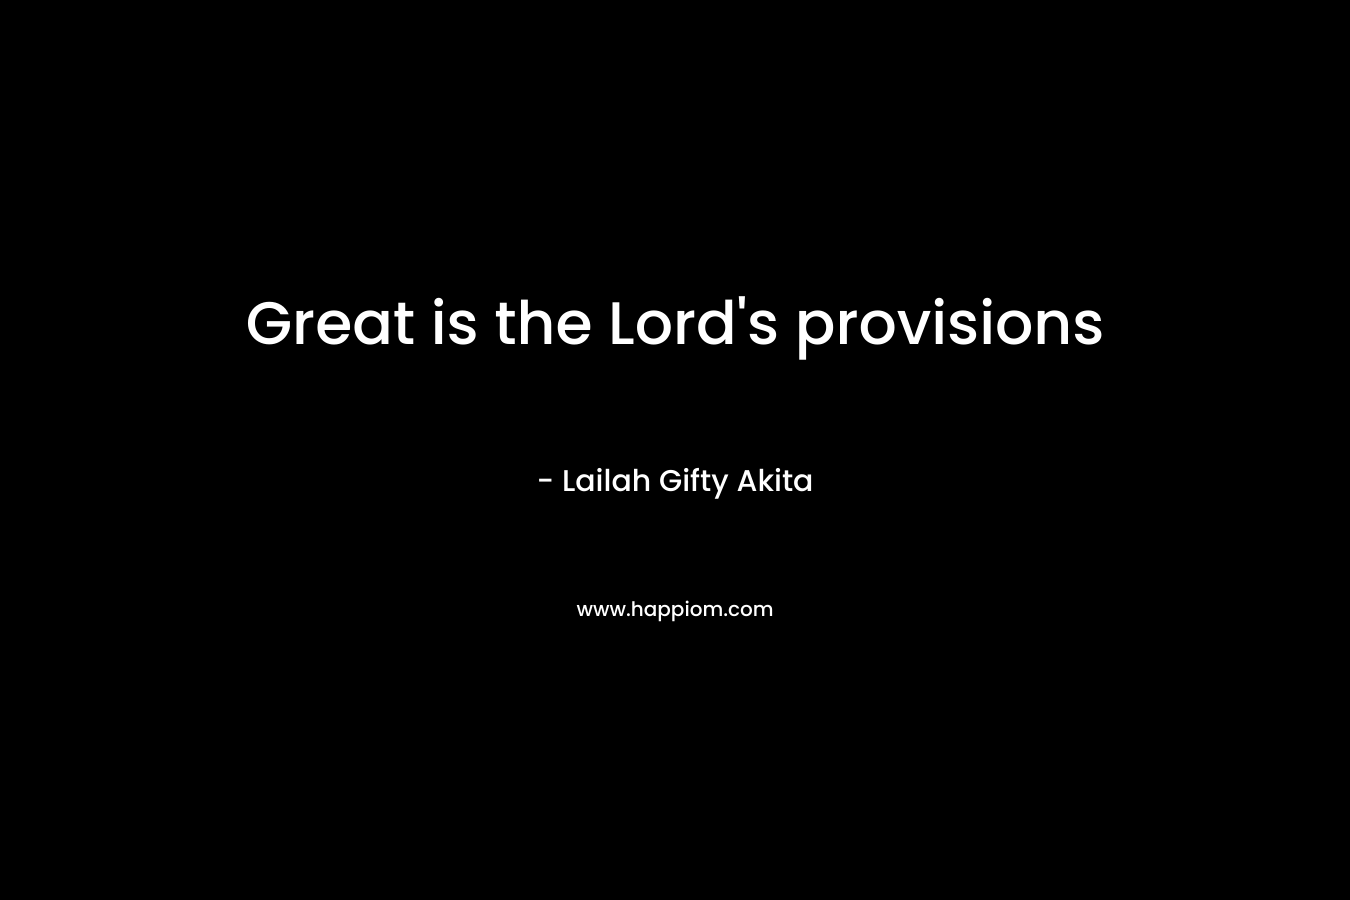 Great is the Lord's provisions